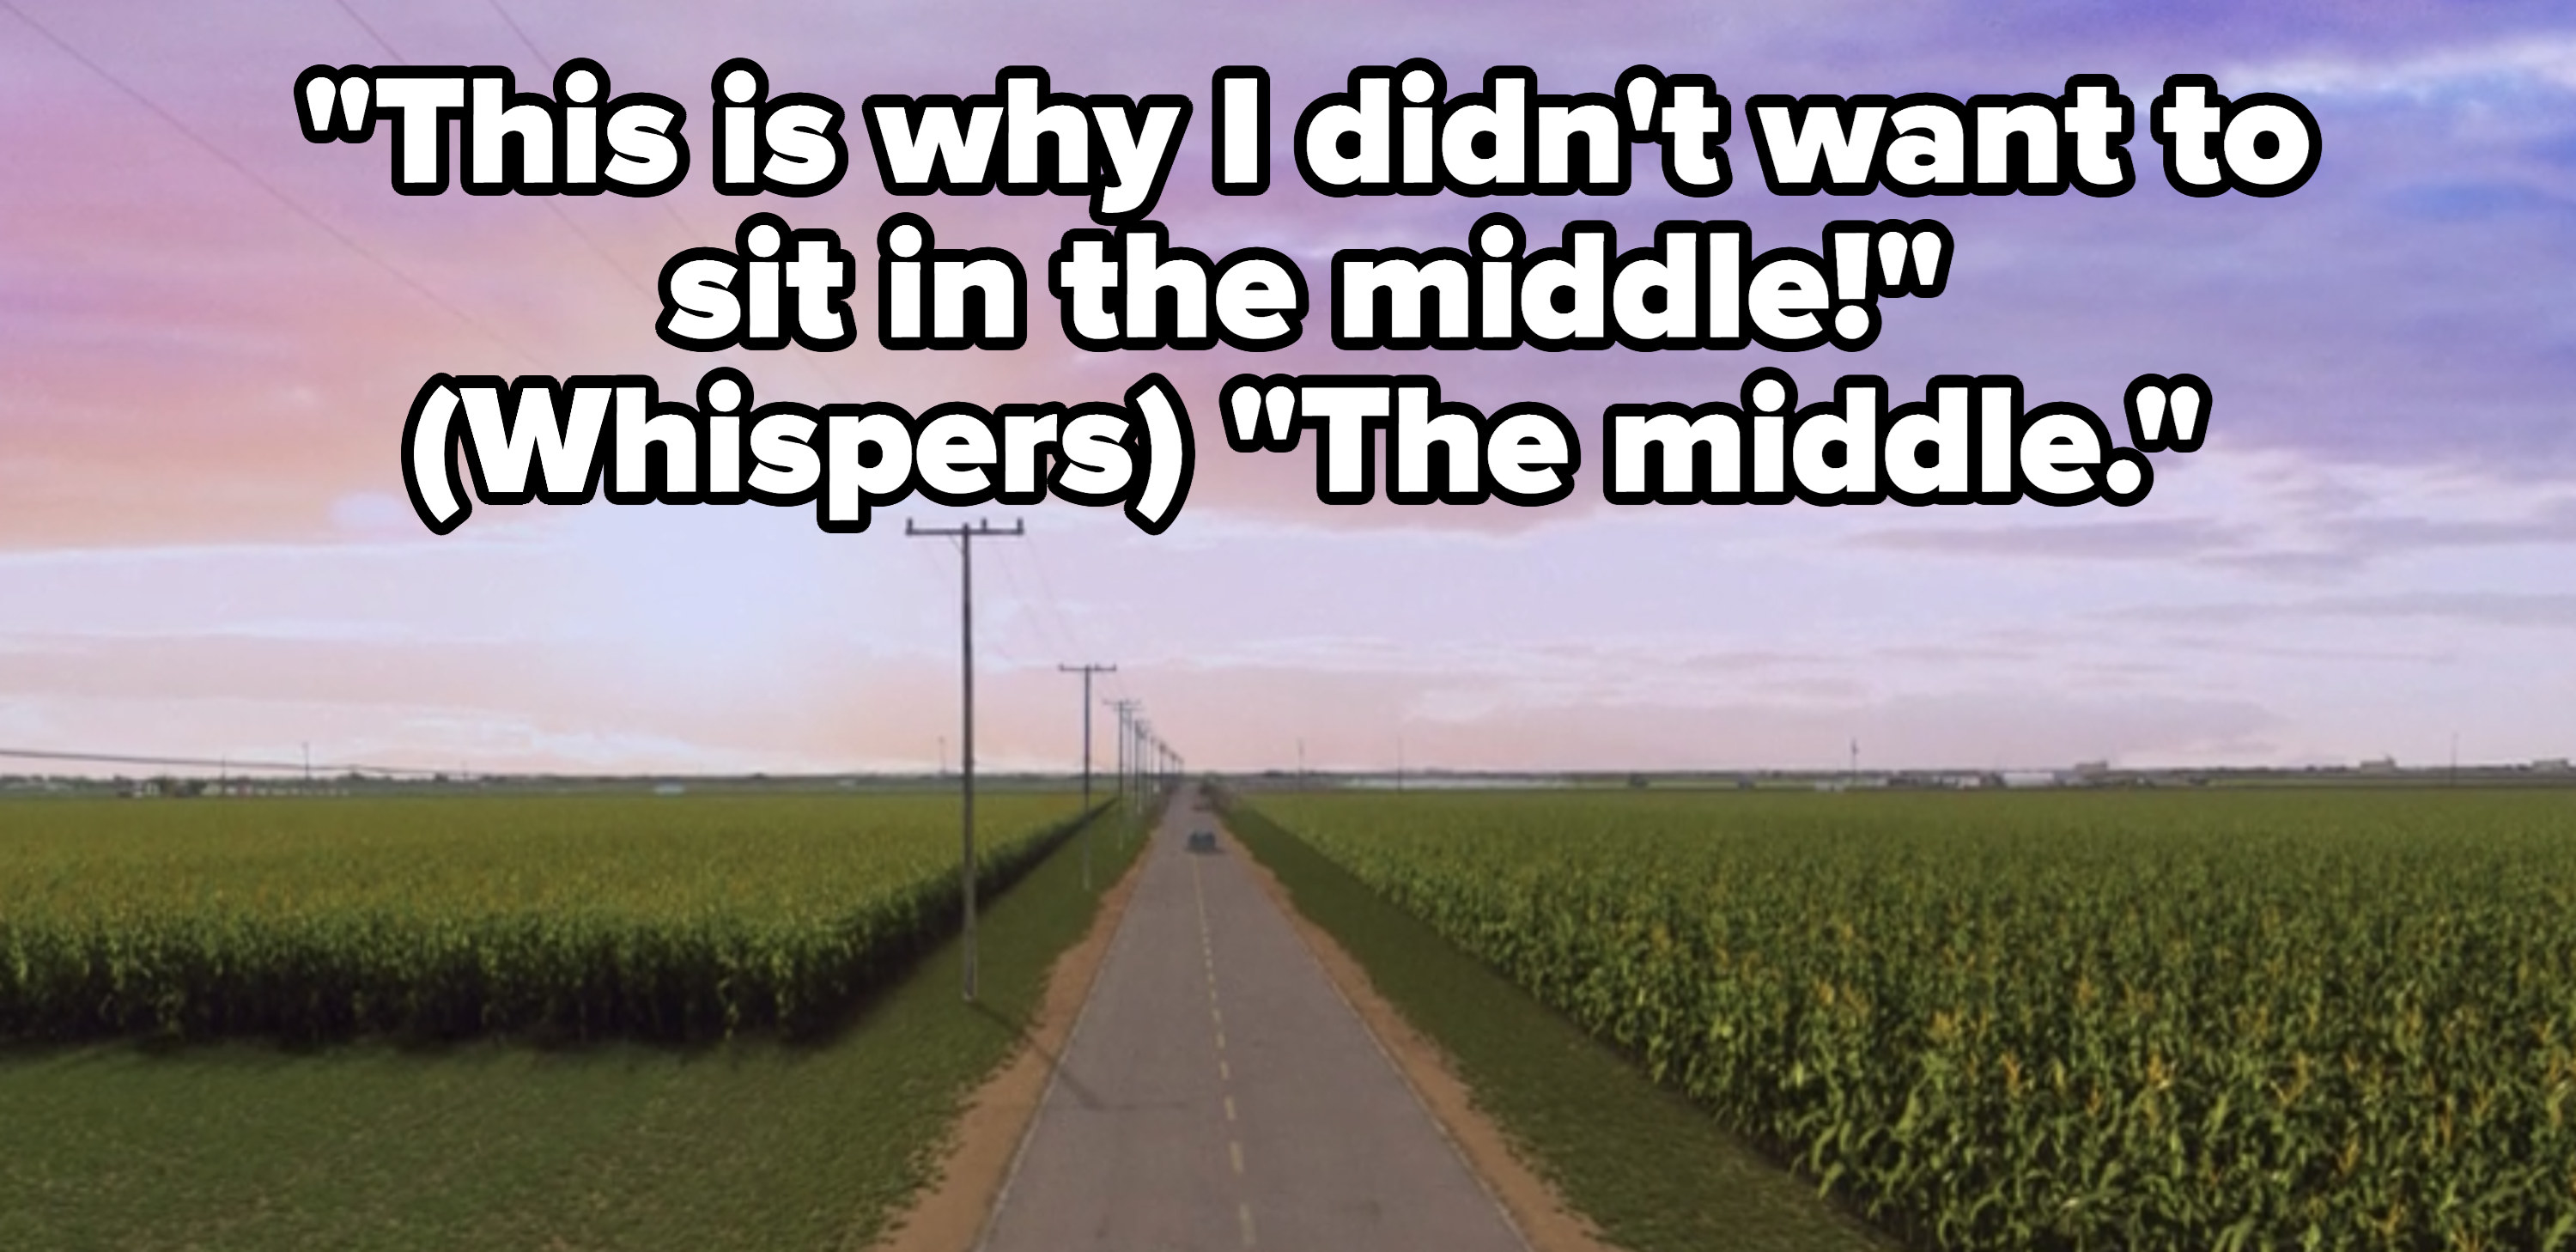 as the car drives away, Brick says &quot;this is why I didn&#x27;t want to sit in the middle!&quot; then whispers &quot;the middle&quot;